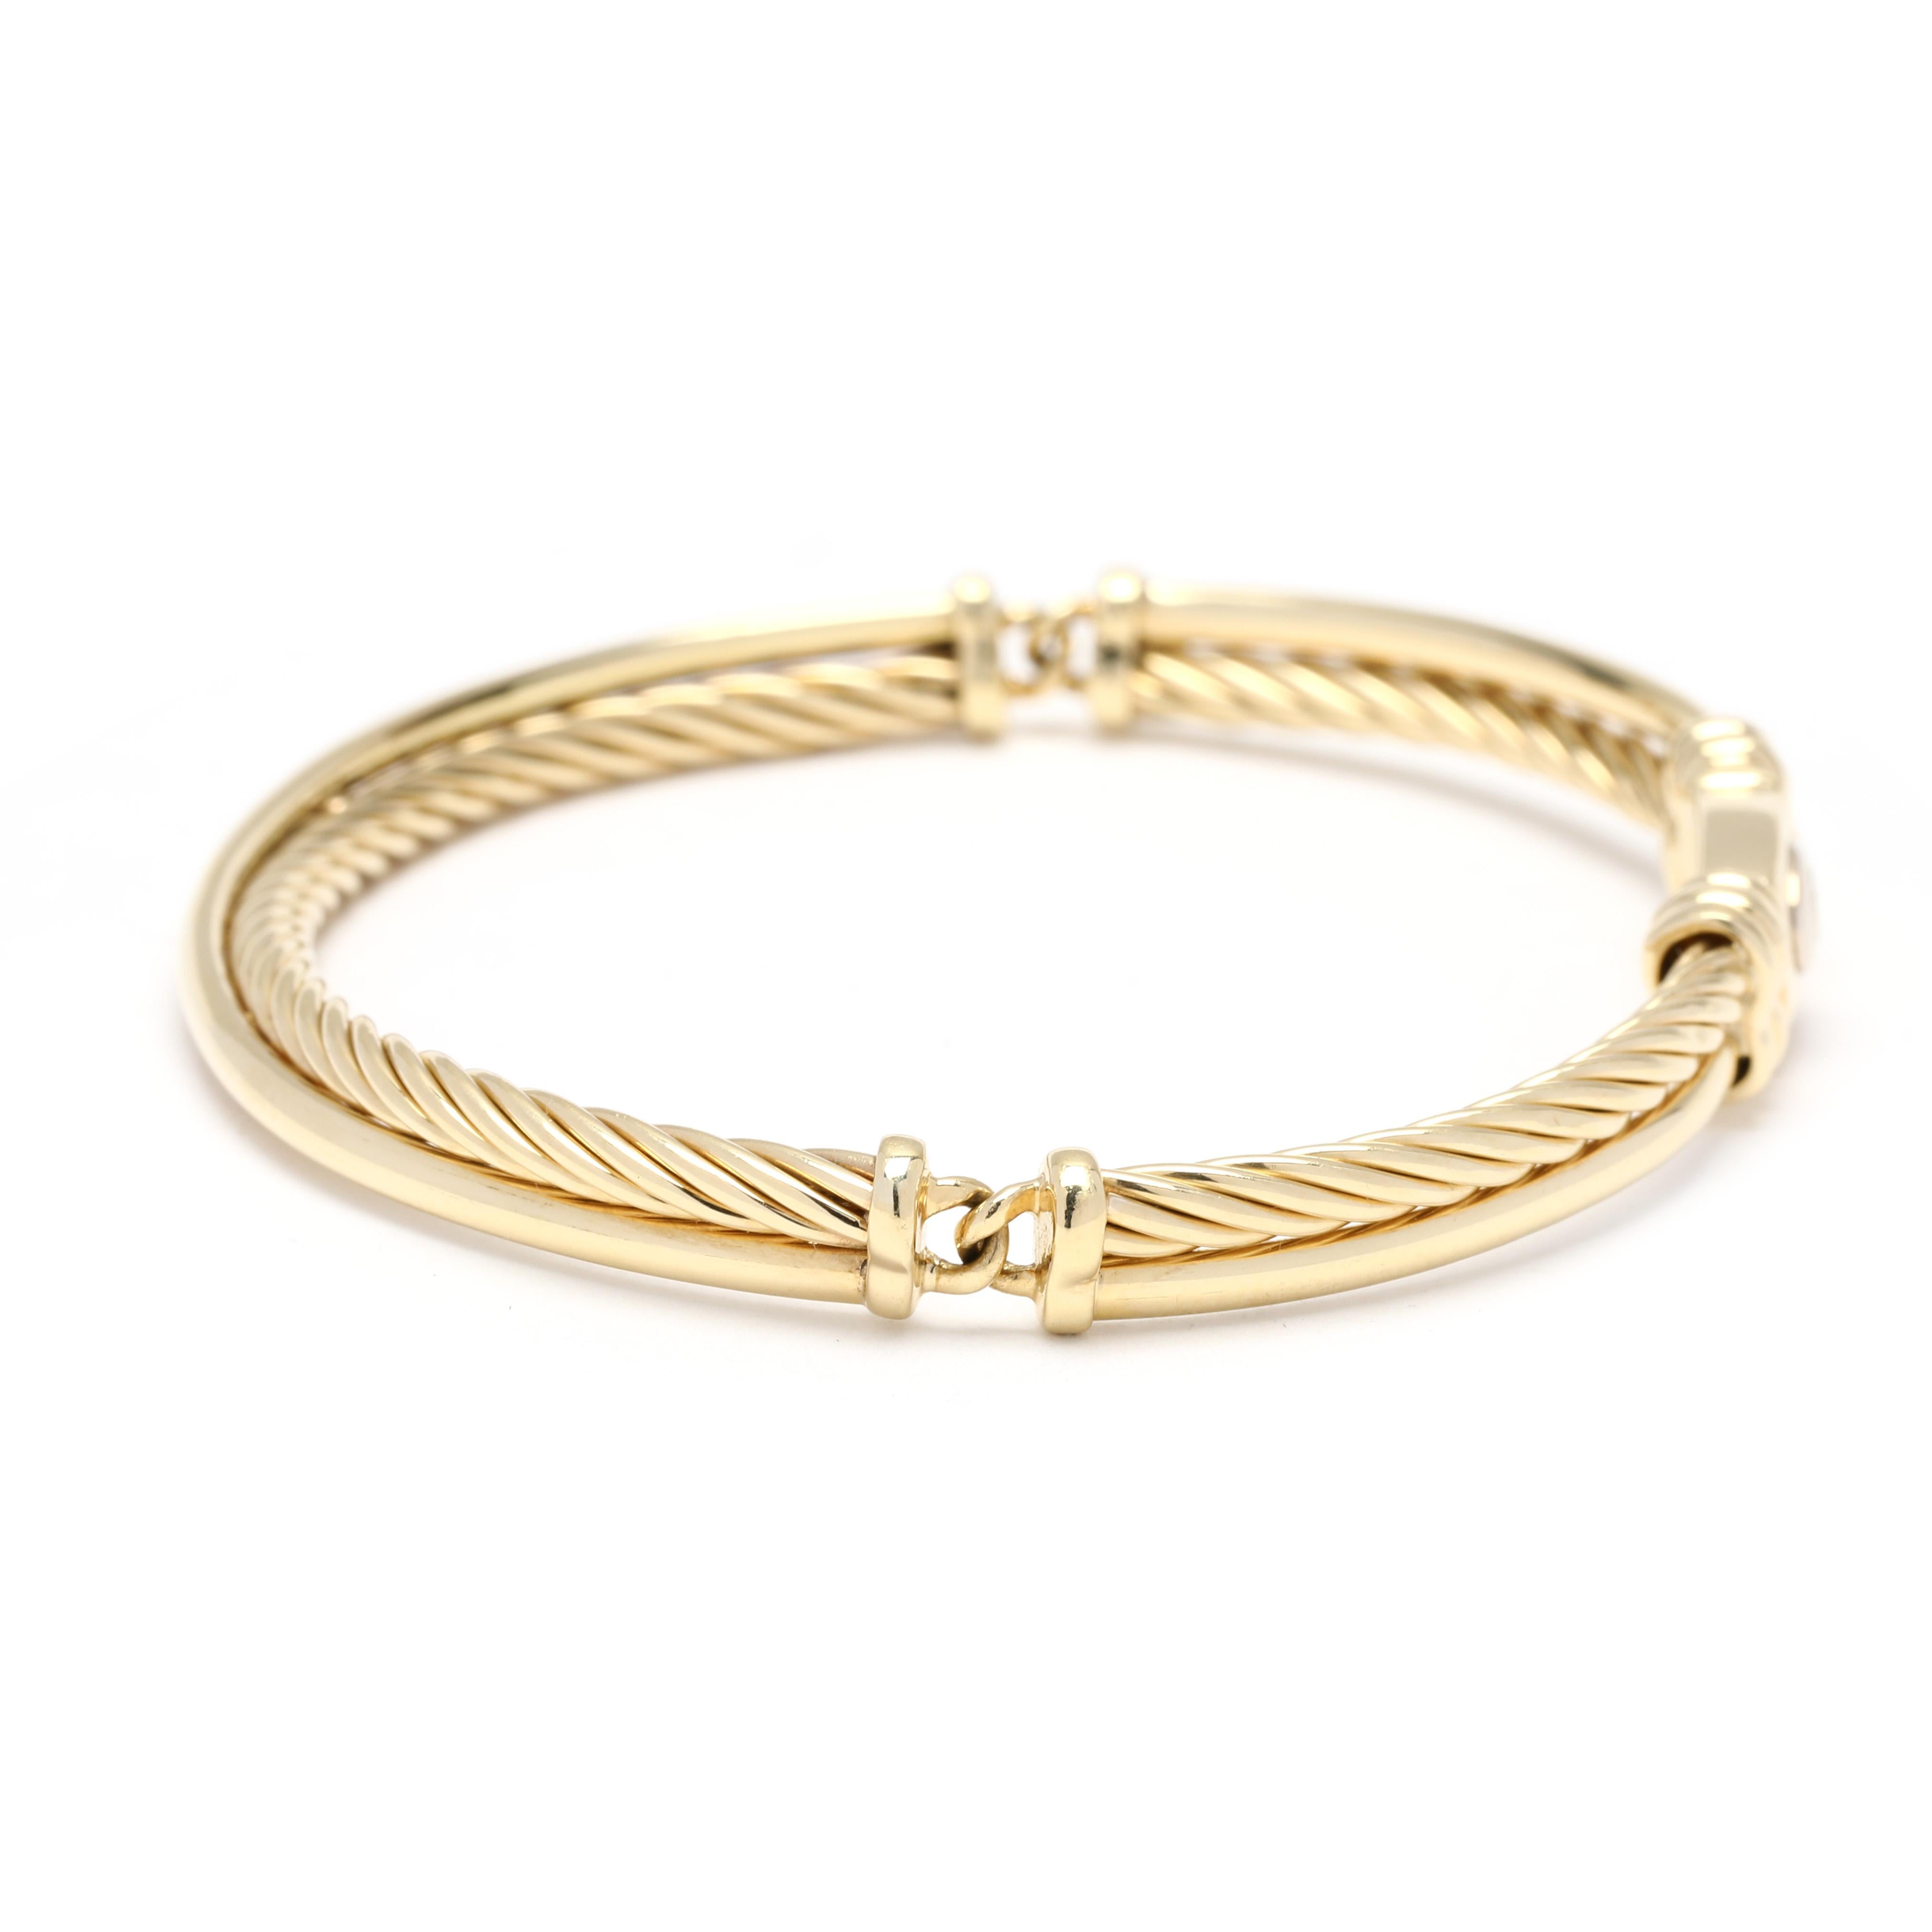 This glamorous David Yurman 18K gold bangle bracelet is sure to become one of your favorite pieces of jewelry. Crafted from 18K yellow gold, this elegant bracelet features a classic crossover cable design that is perfect for wearing with casual or